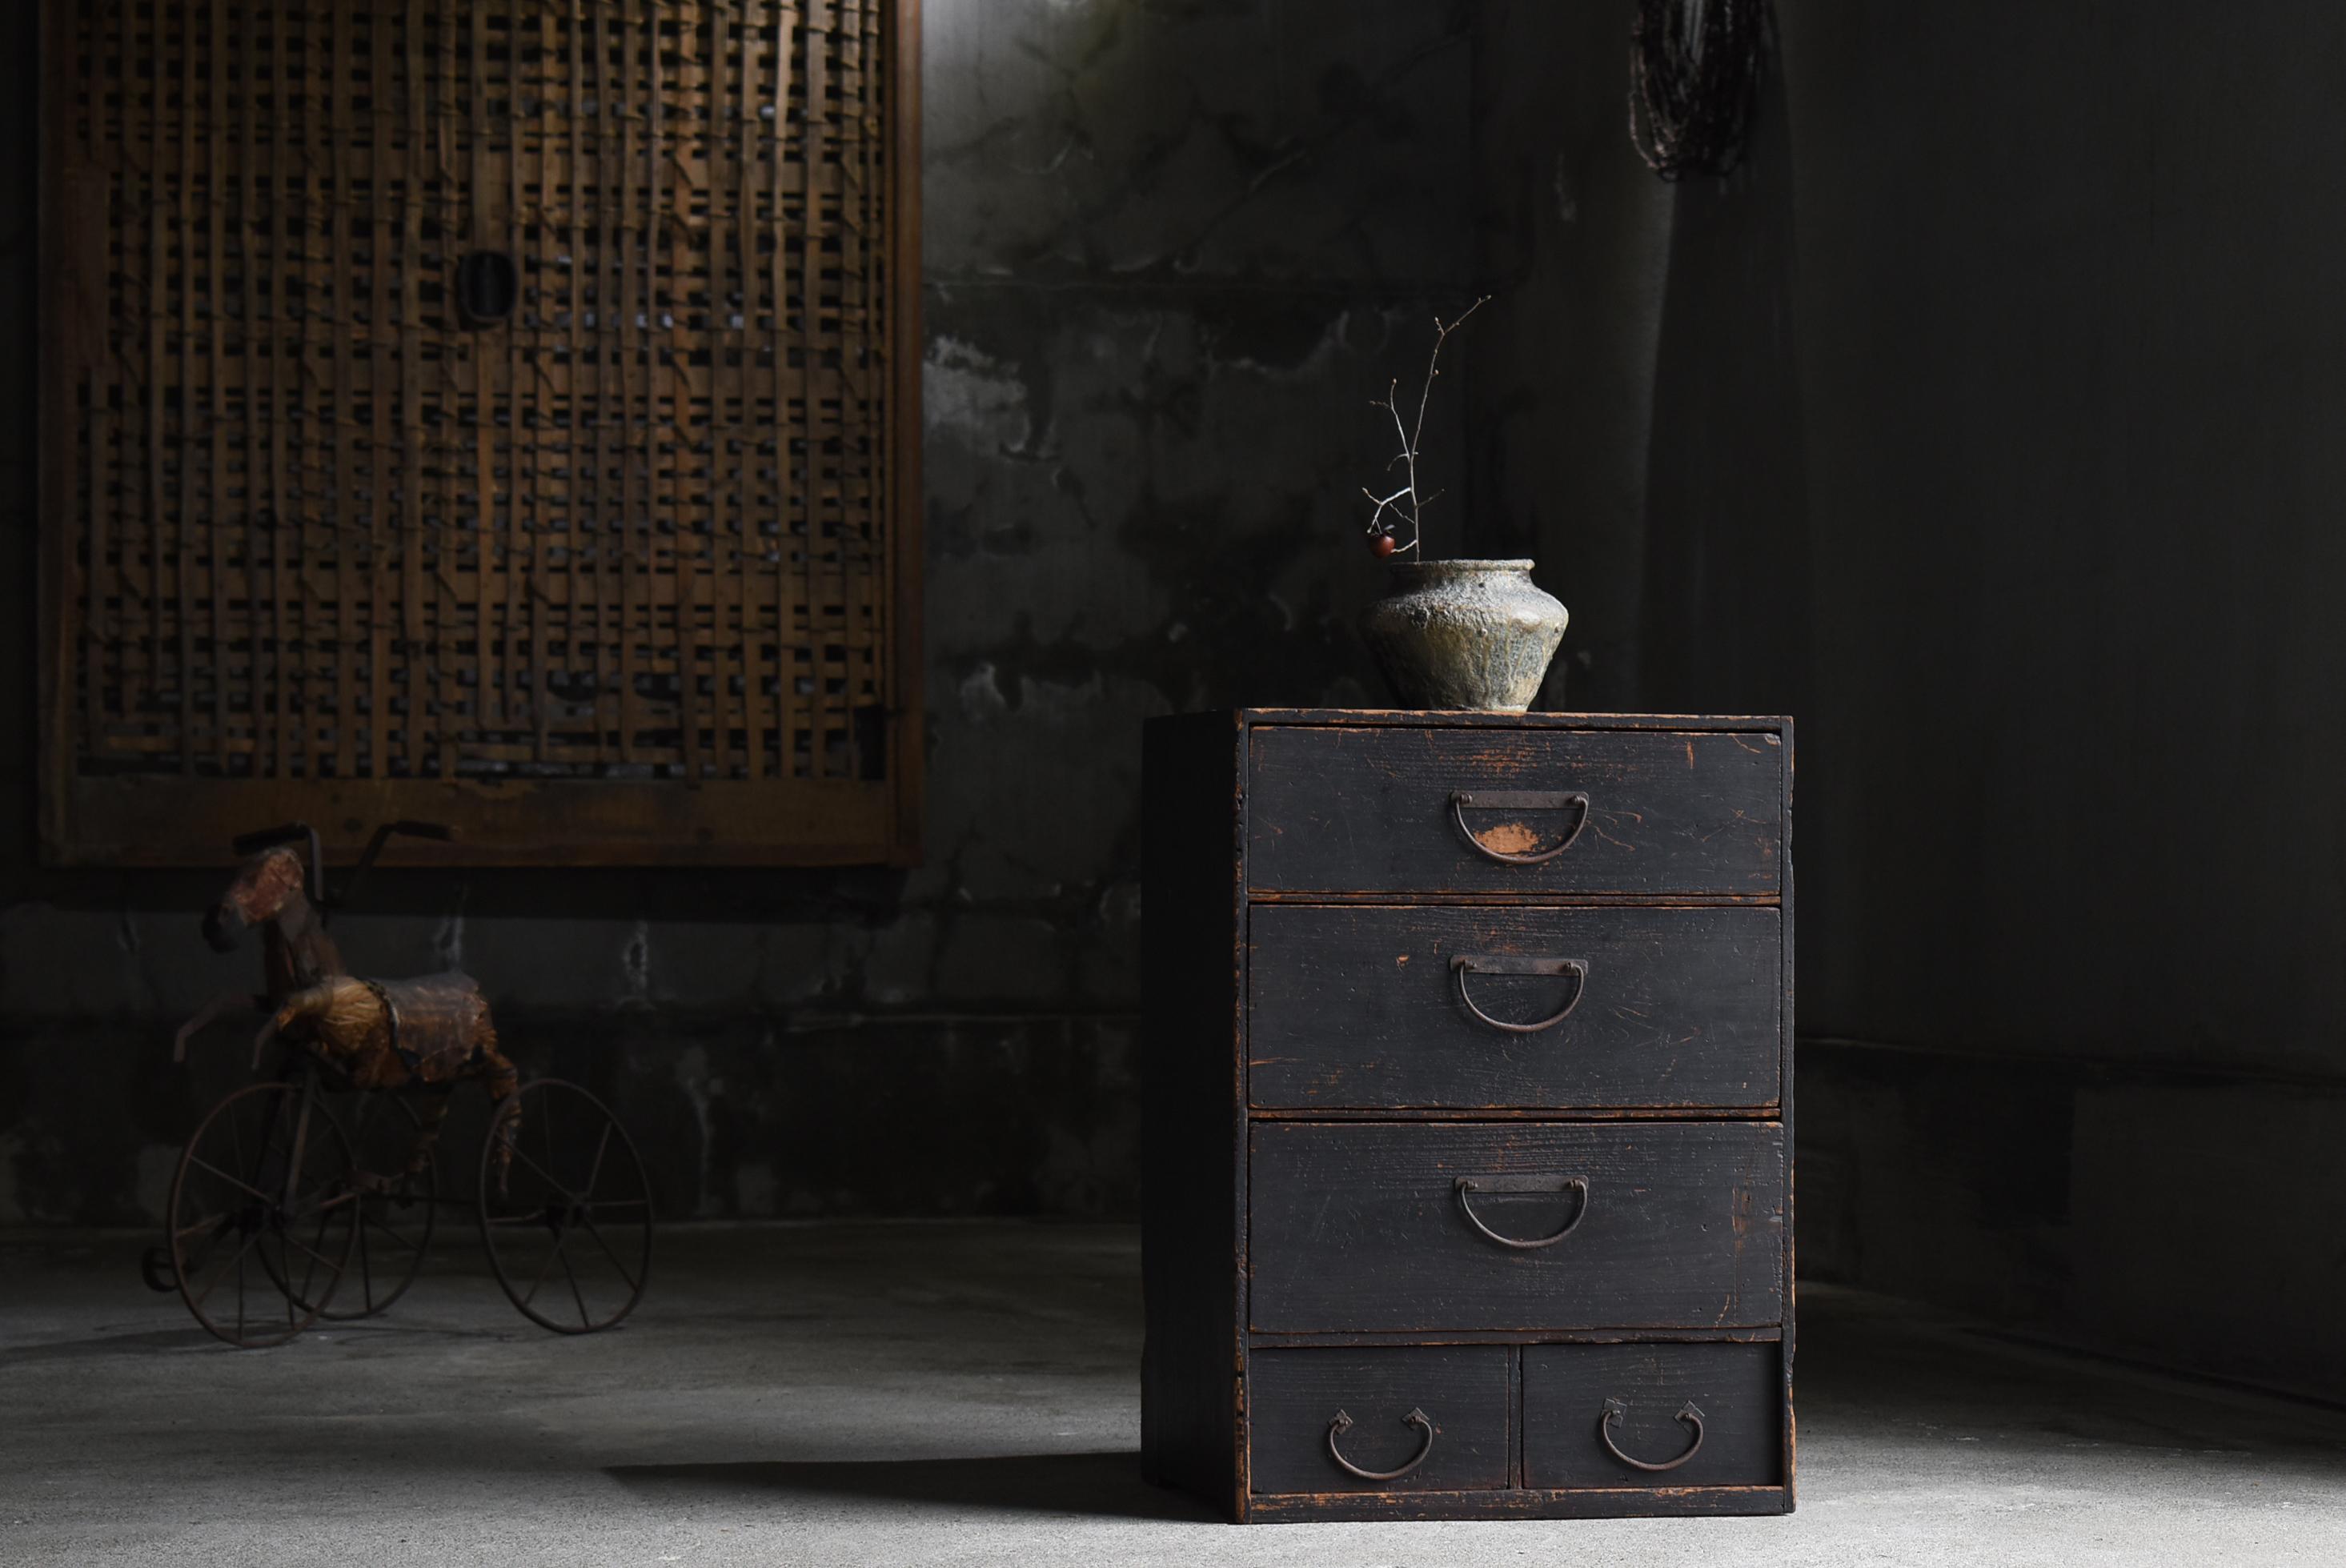 
Very old Japanese black drawer storage.
The furniture is from the Meiji period (1860s-1900s).
Material is cedar wood.
The handles are made of iron.

The design is simple and lean.
It is a very beautiful piece of furniture with a uniquely Japanese